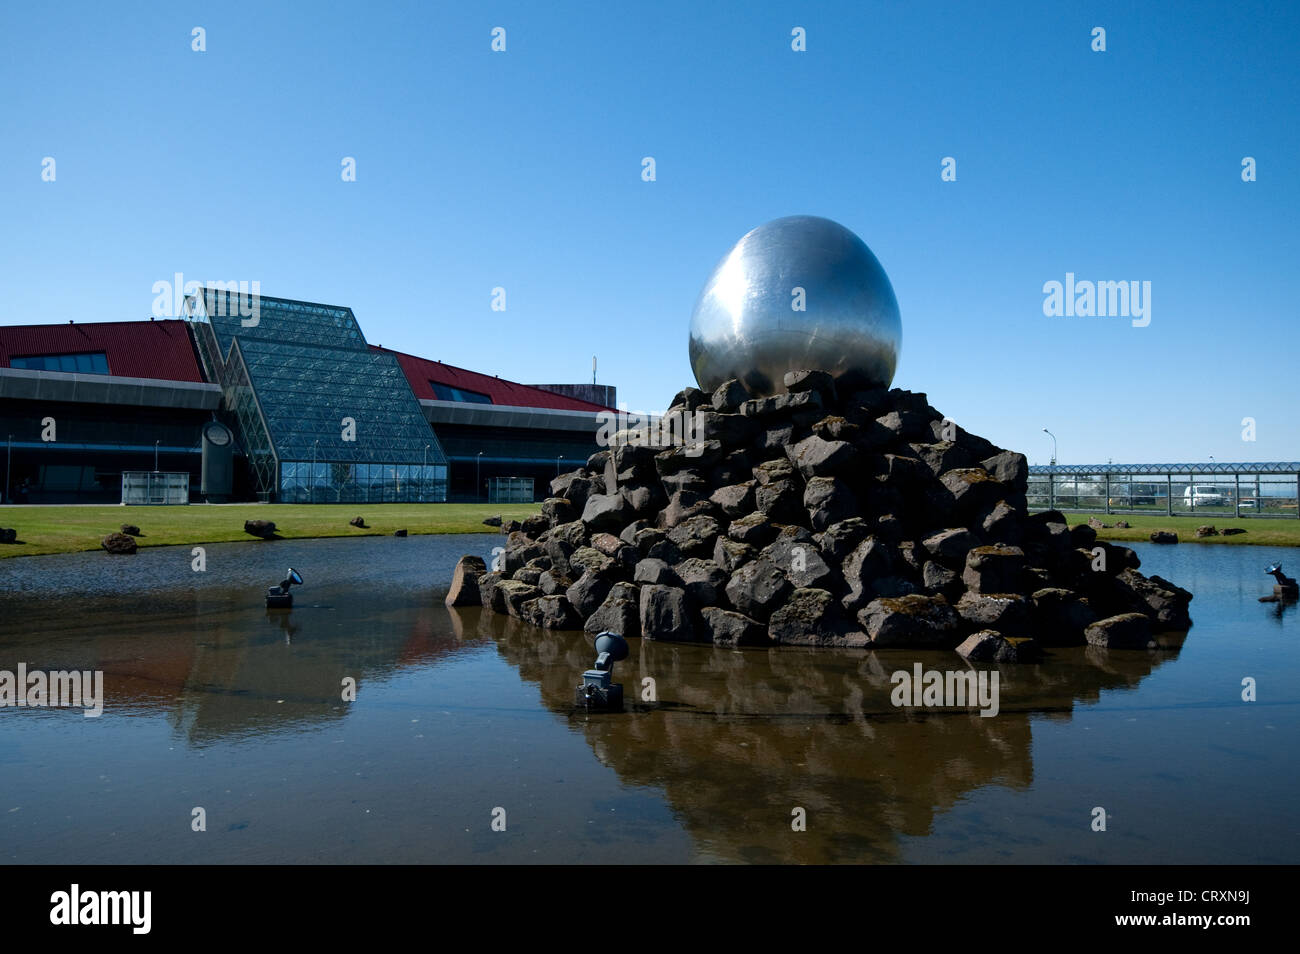 Iceland Reykjavik-Keflavic airport, main building with sculpture The Jet Nest of Magnus Tomasson Stock Photo